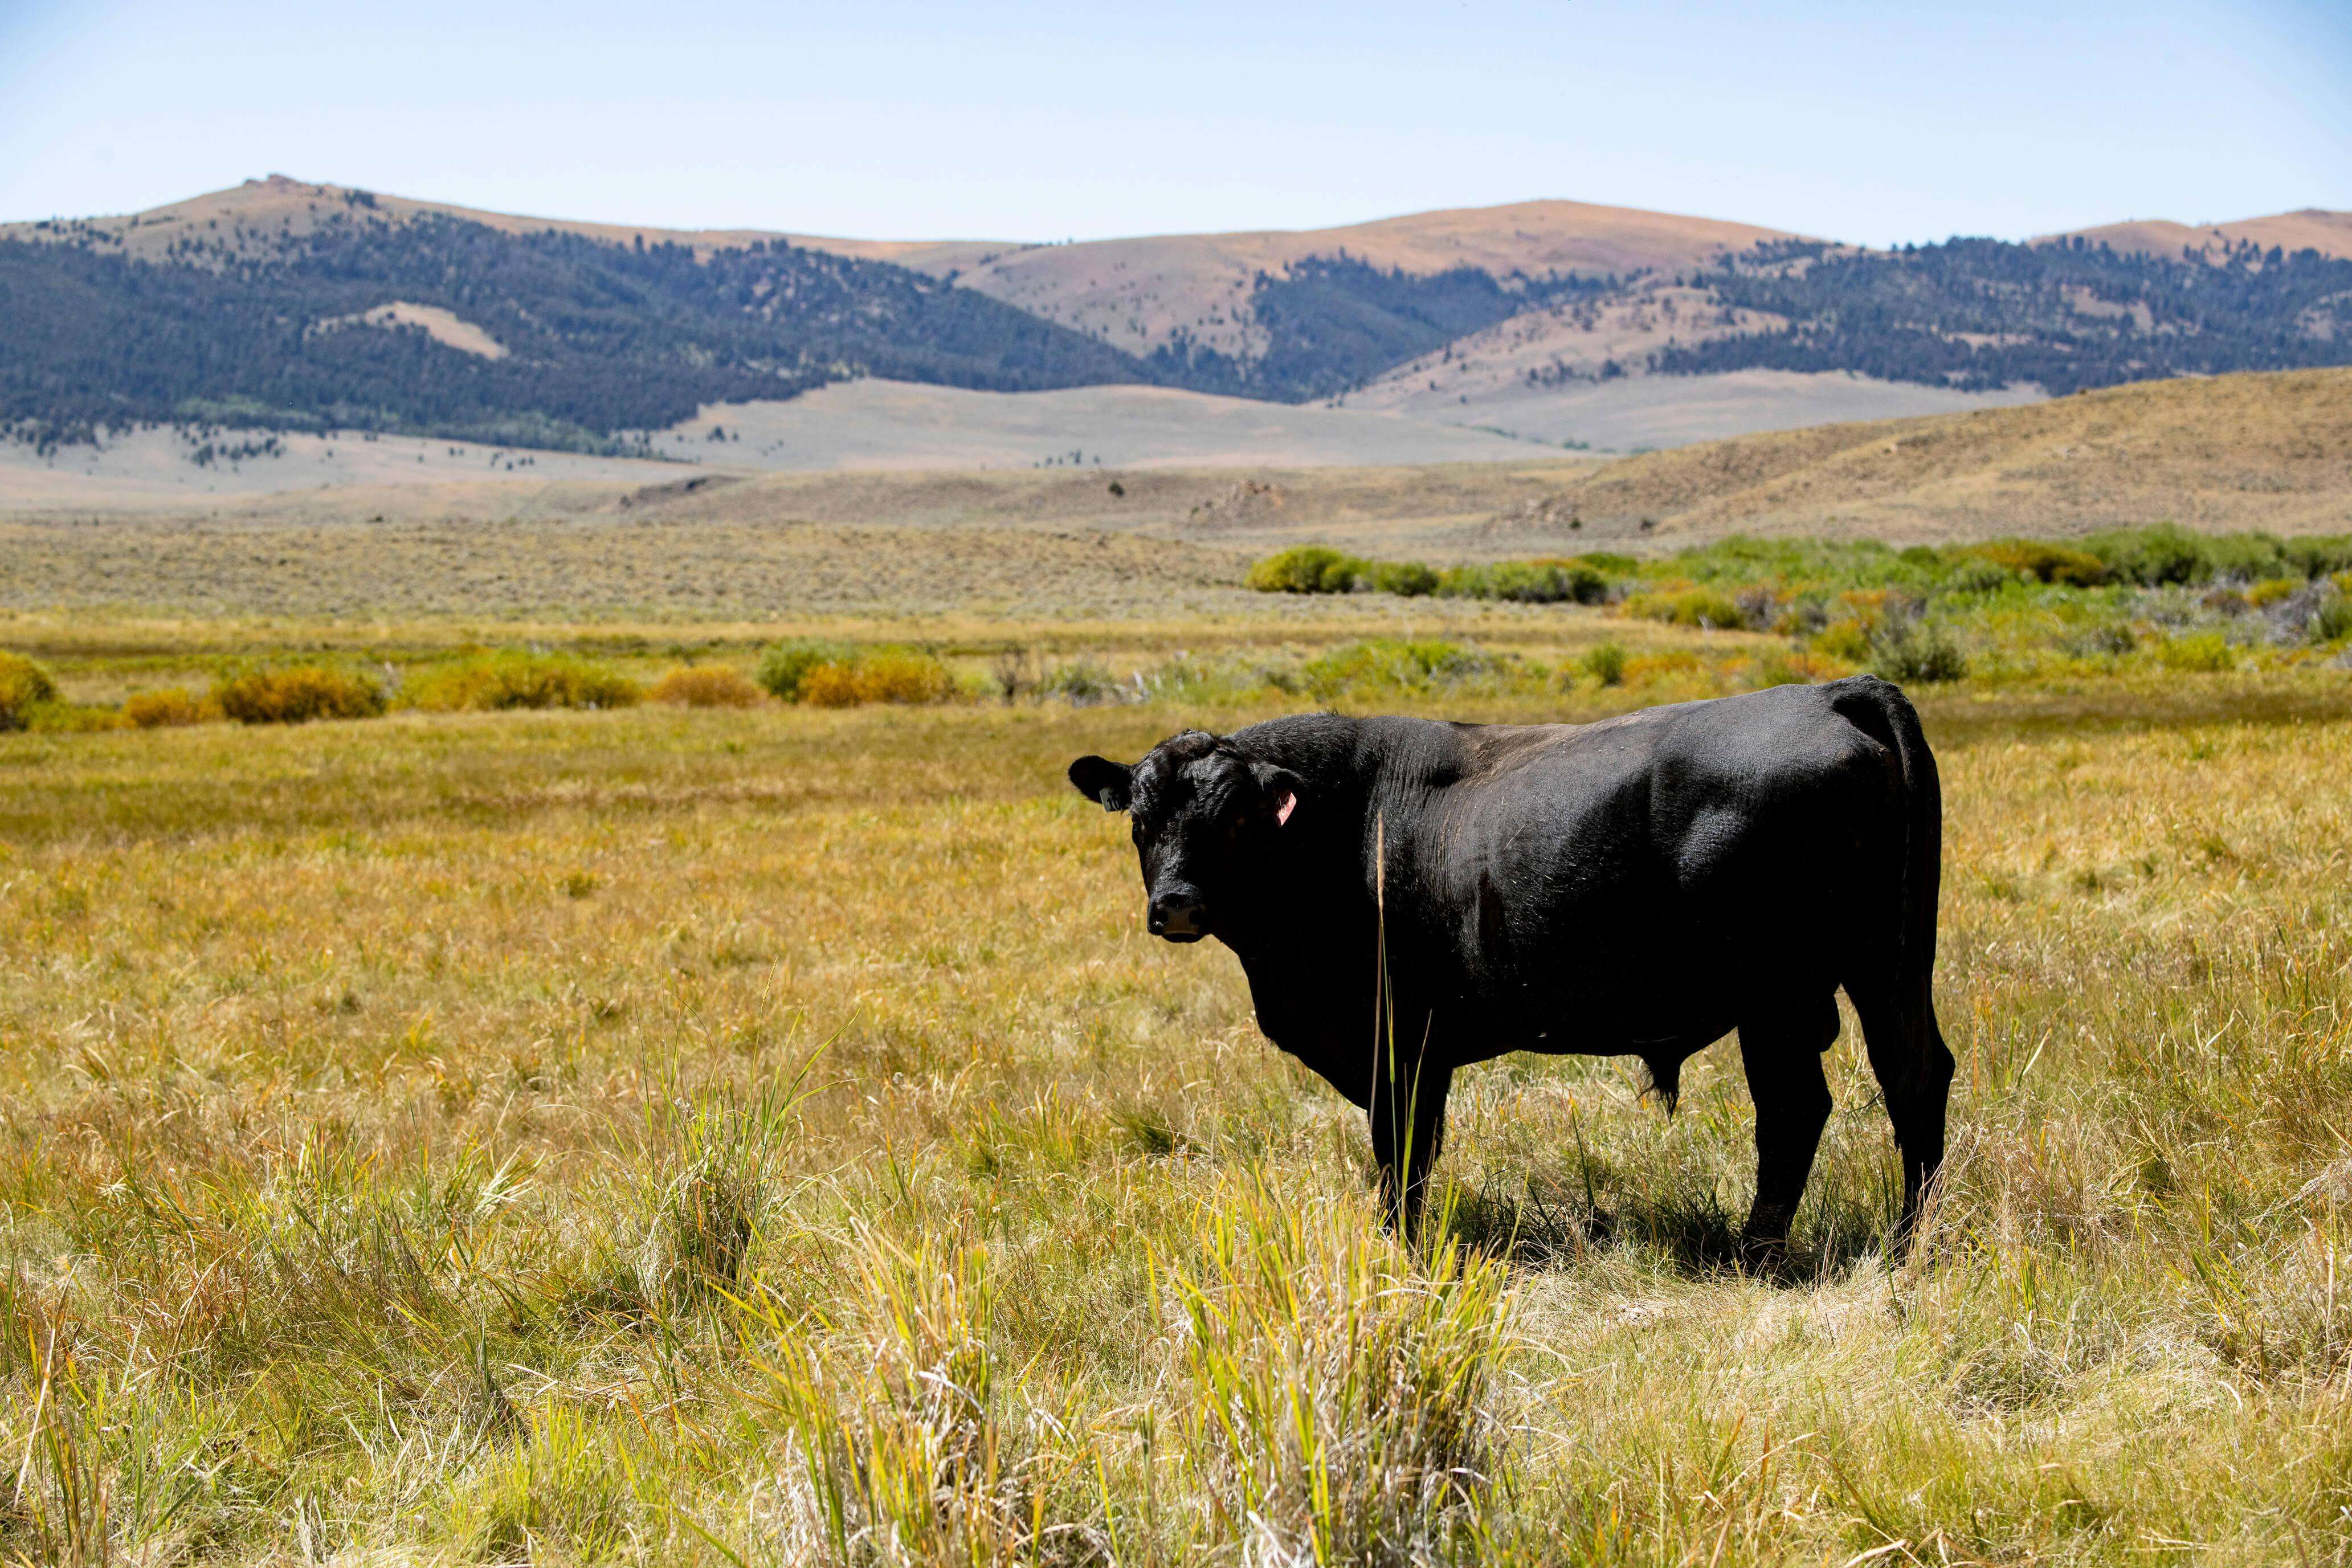 Black bull standing in open pasture with mountain range in the distance.